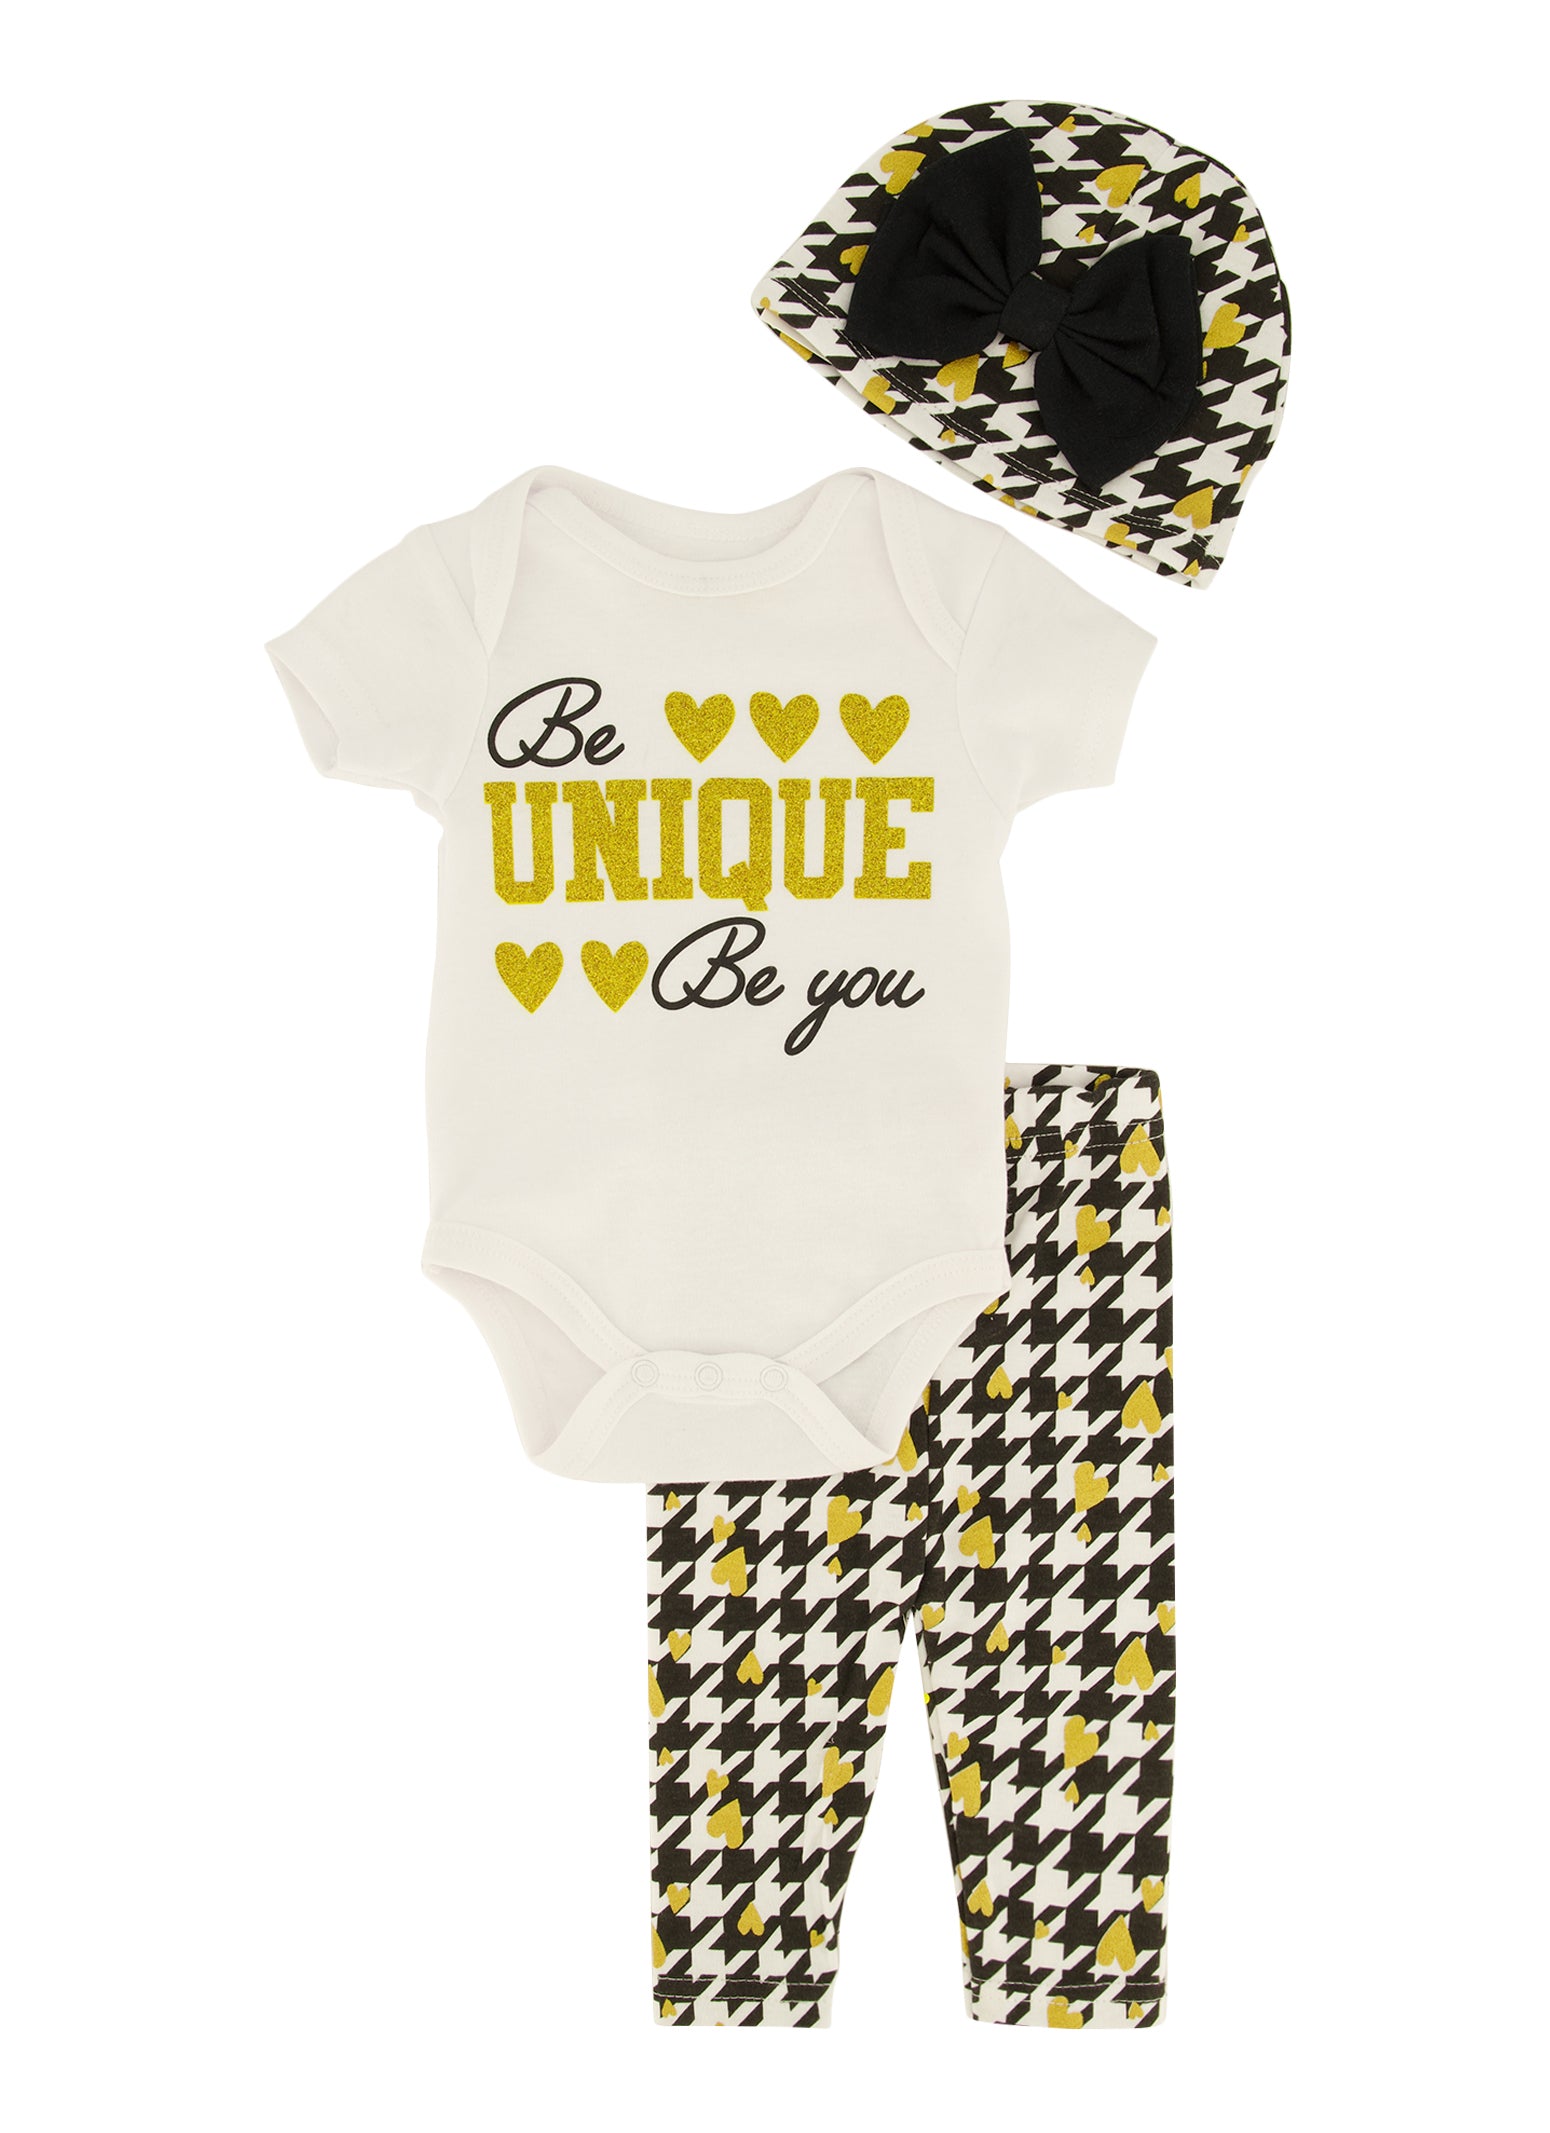 Baby Girls 0-9M Be Unique Be You Bodysuit and Houndstooth Leggings Set, White, Size 3-6M